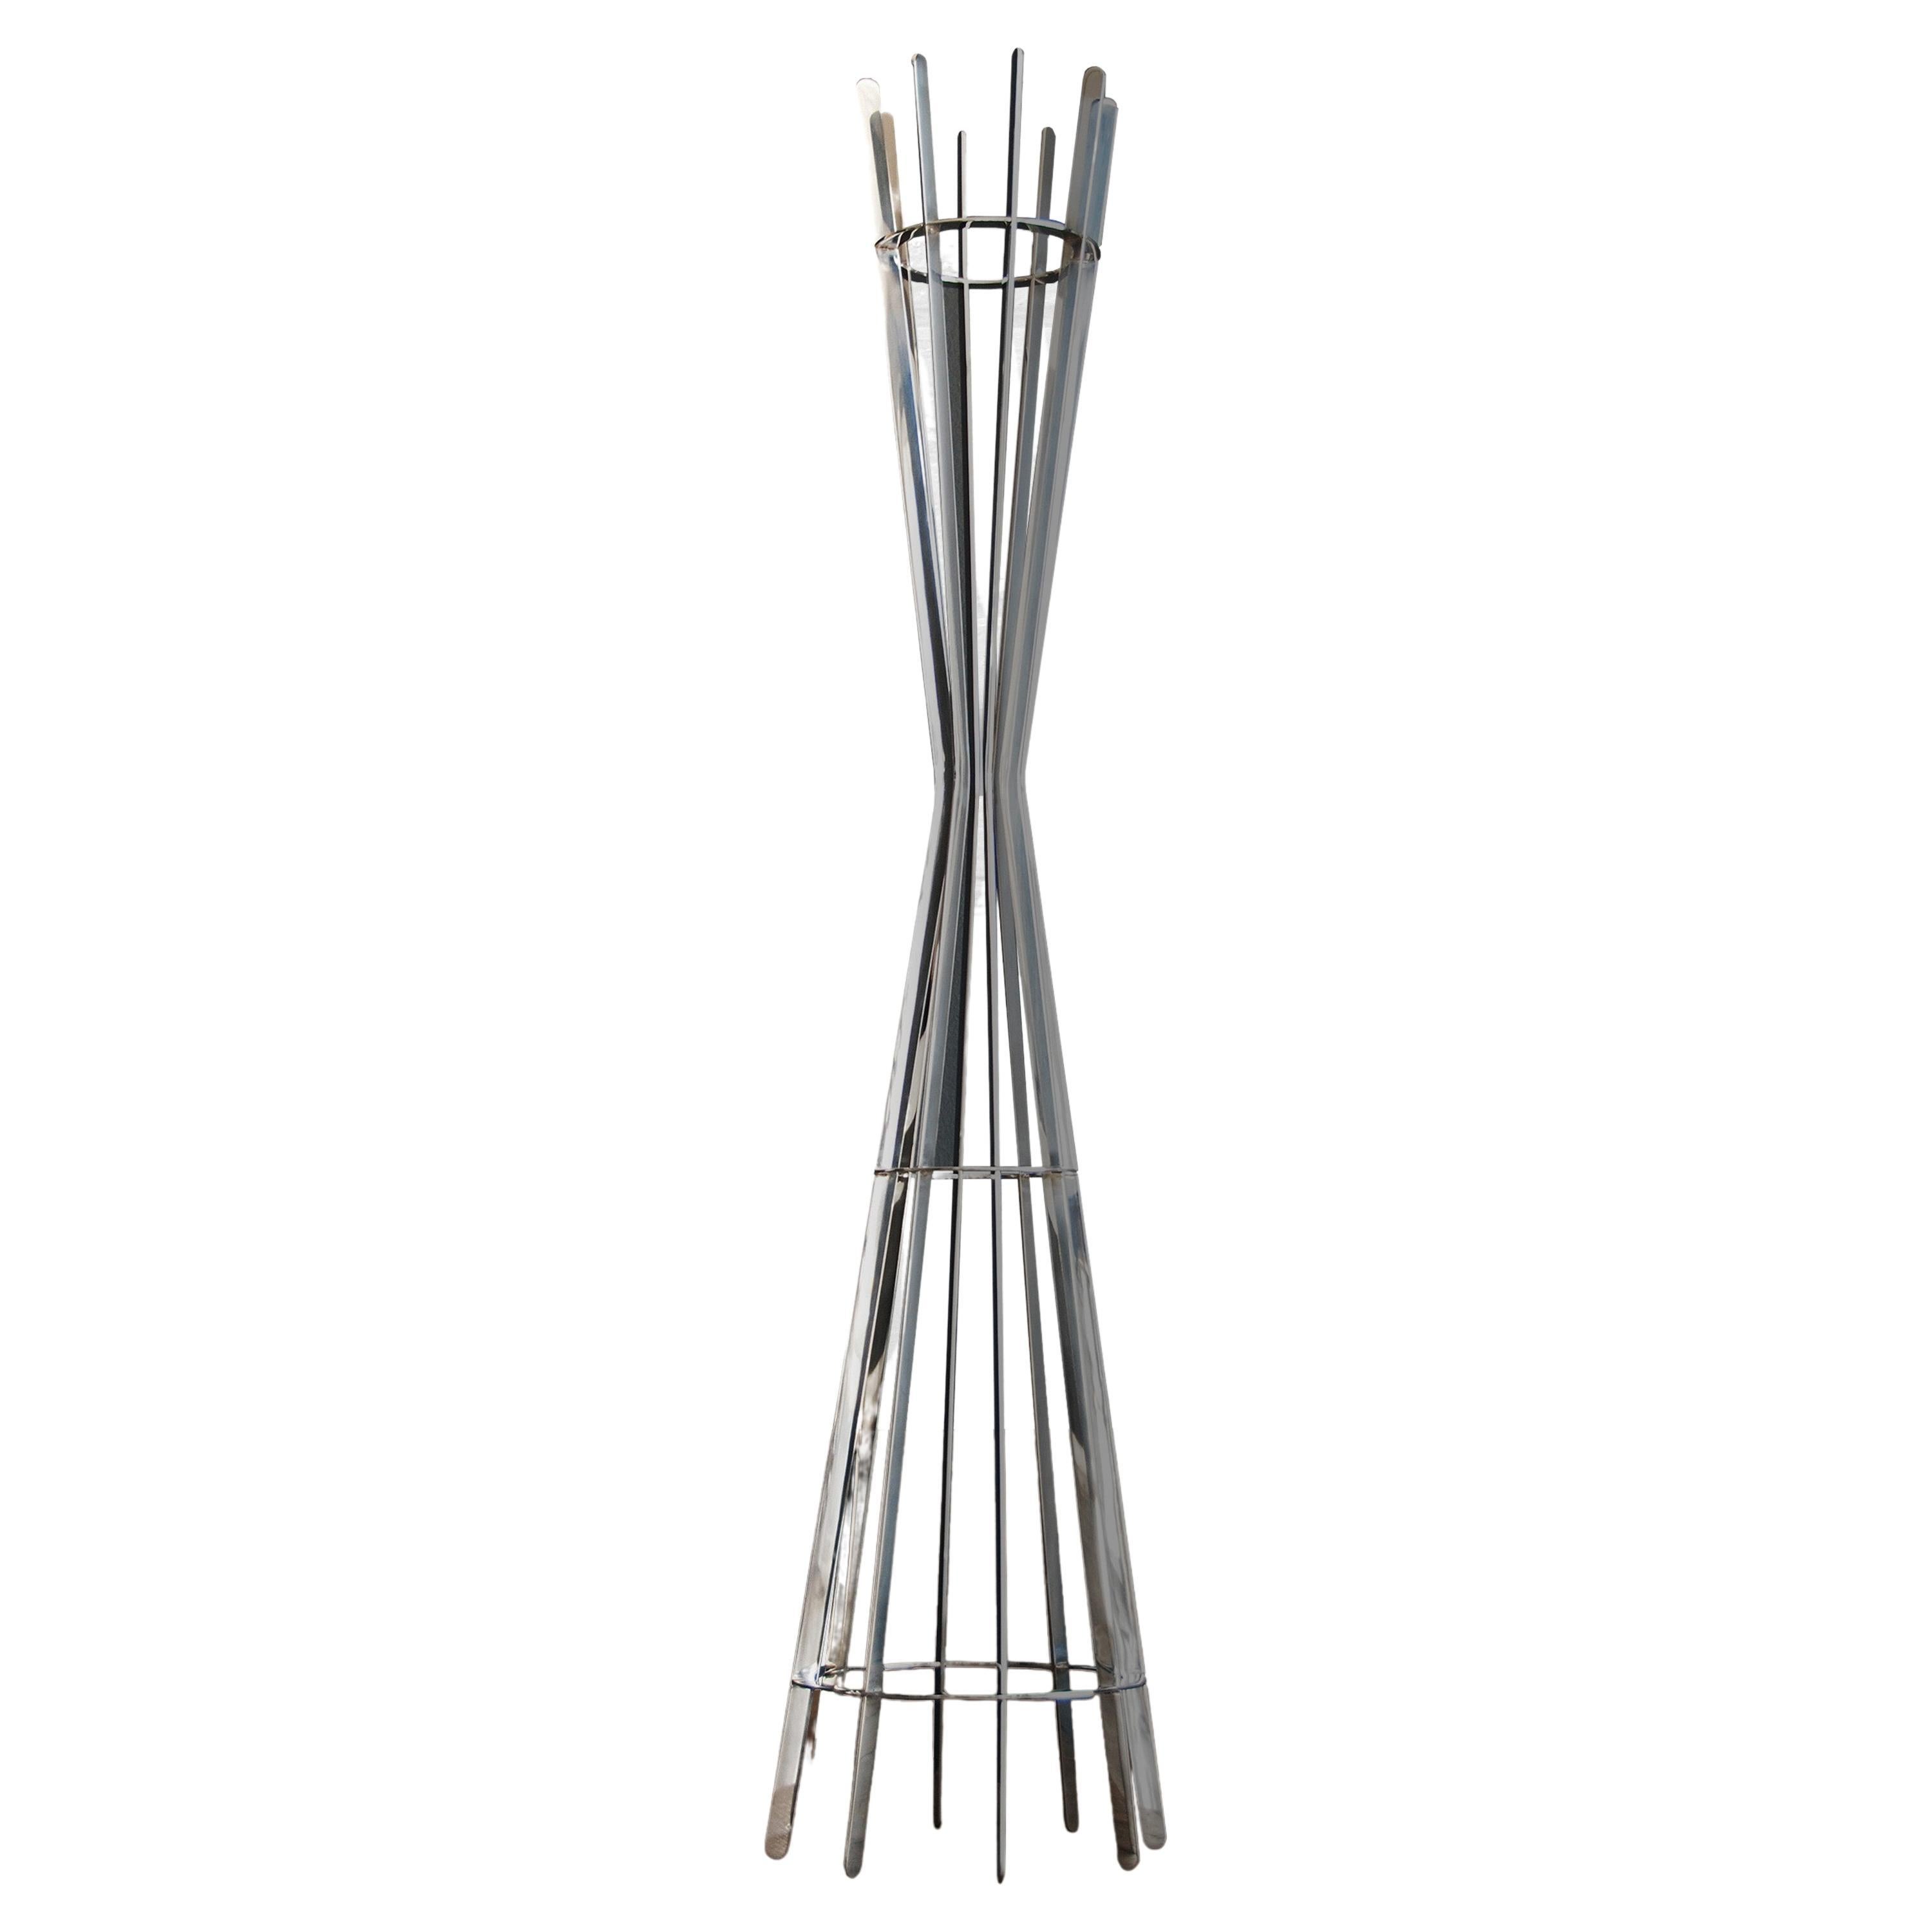 Core Coat Rack by Maria Beckmann, Represented by Tuleste Factory For Sale